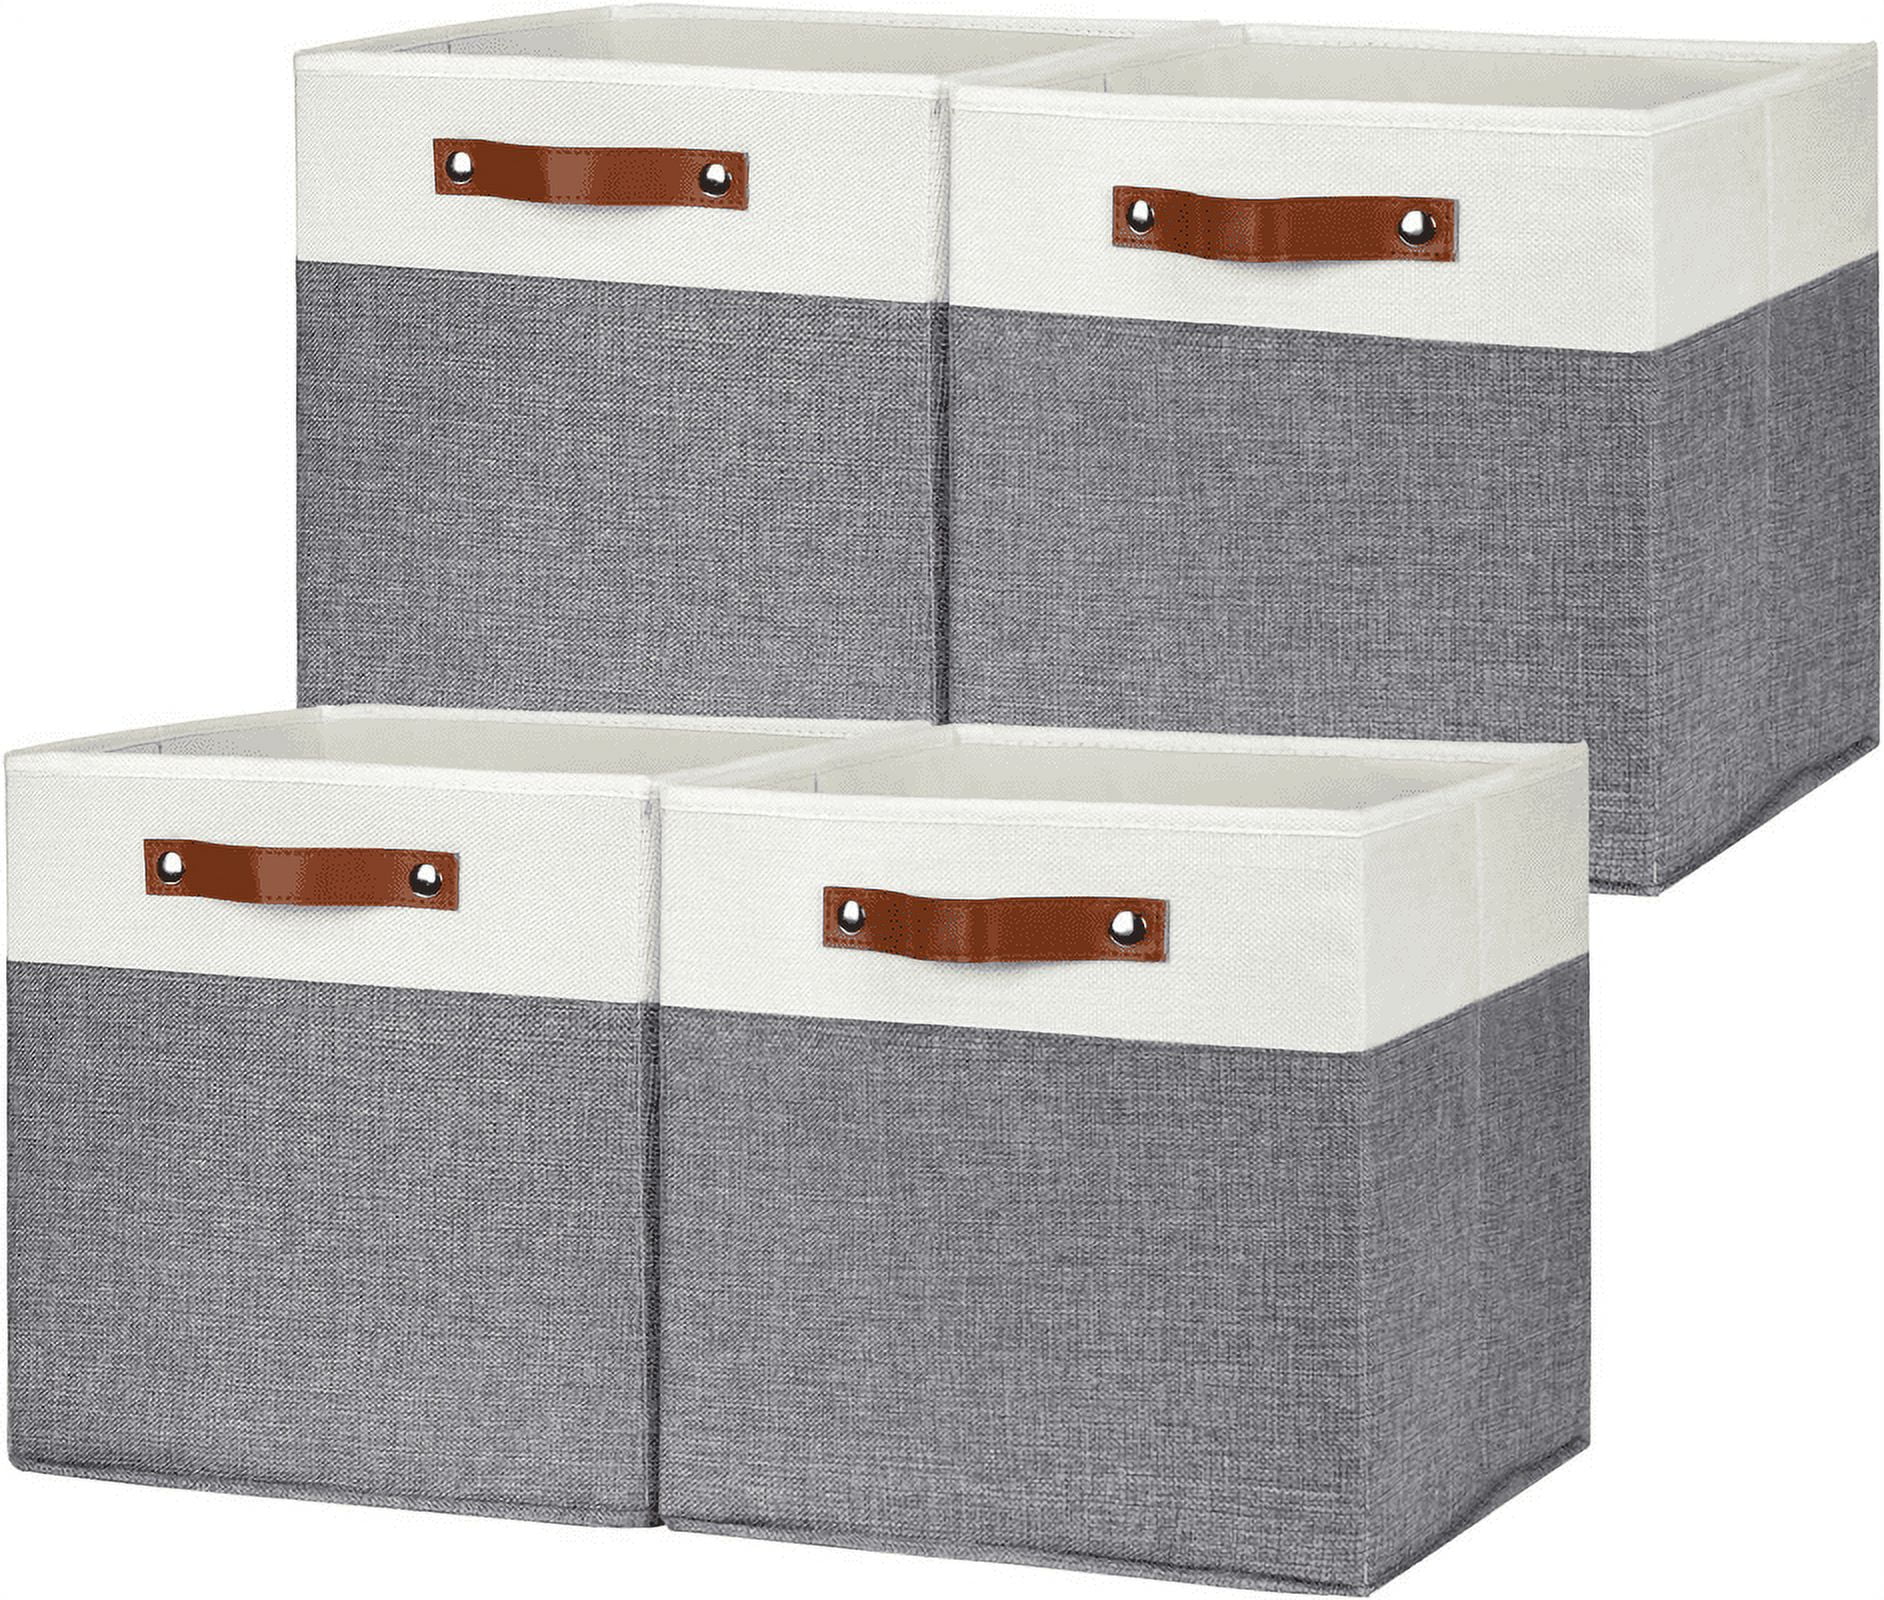 DULLEMELO 13x13 Storage Cubes Baskets 4 Pack Fabric Cube Storage Bins ...